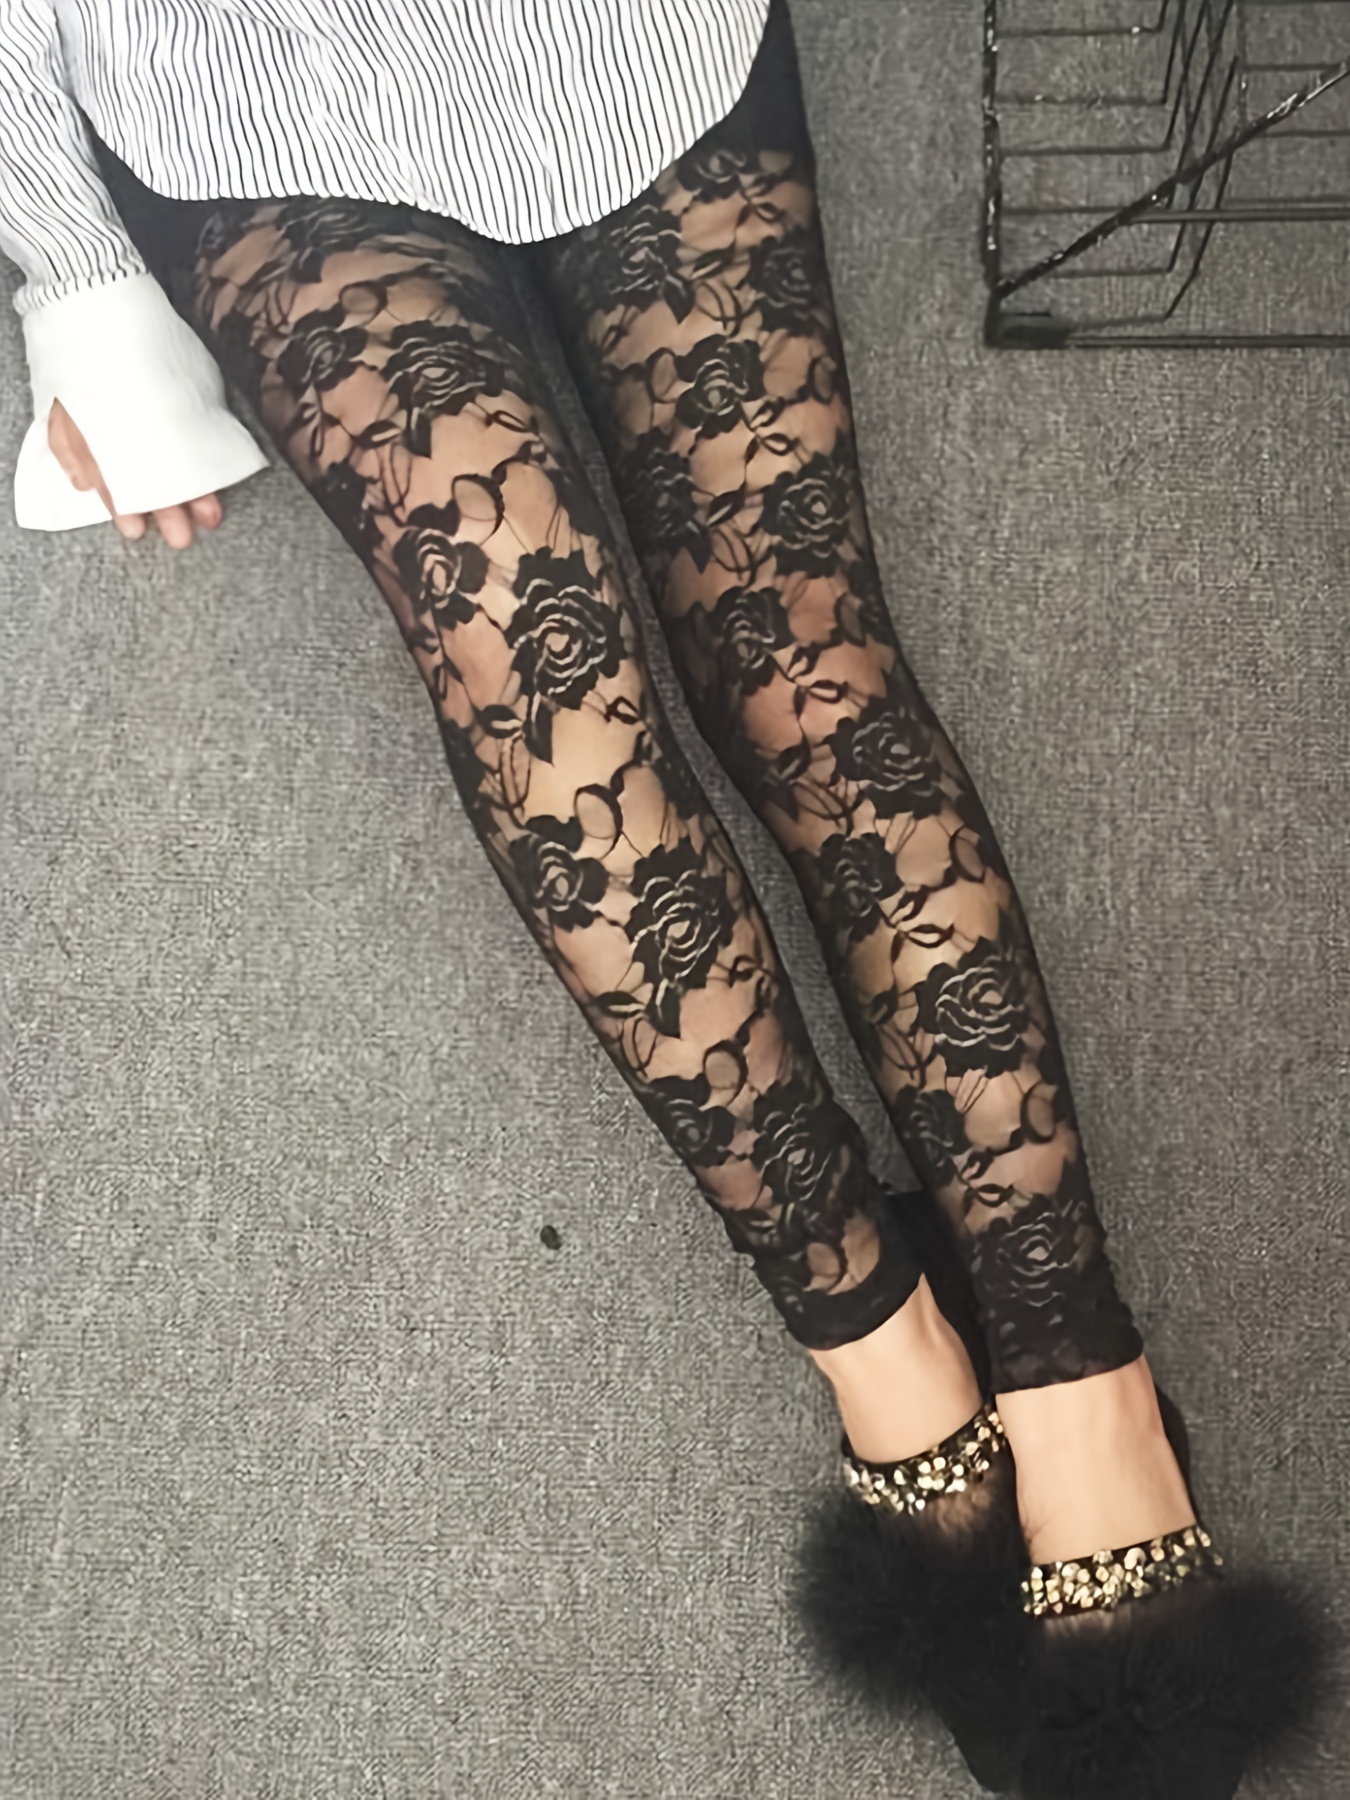 Lace Leggings for Women Plus Size Mesh Hollow Floral Sheer Leggings High  Waist Casual Pencil Pants Sexy Cut Out Tights